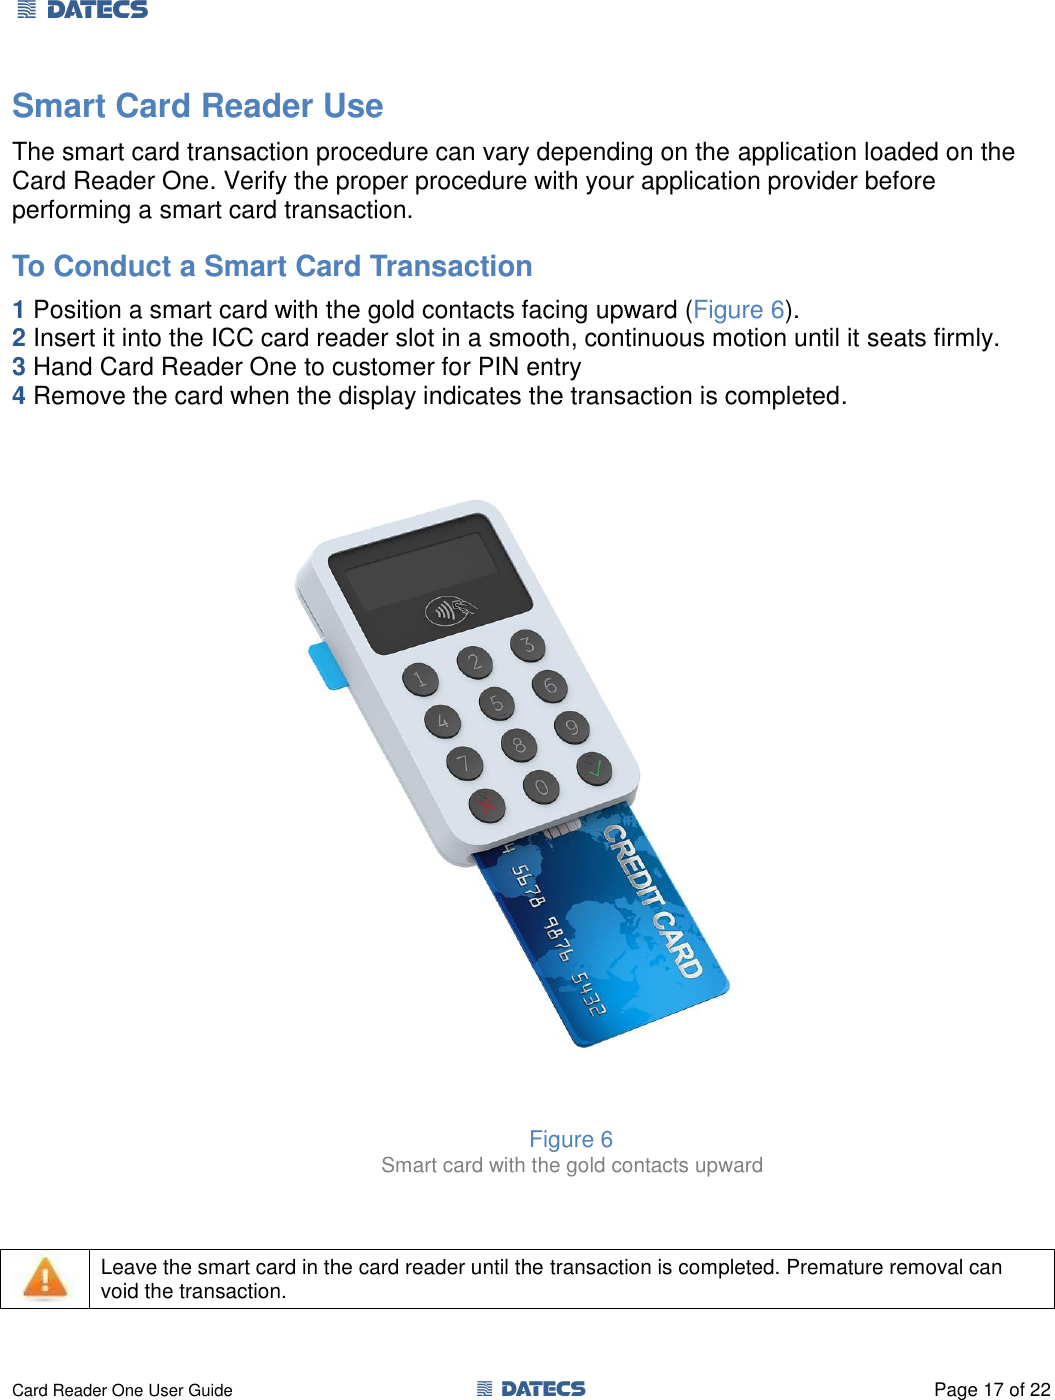 1 DATECS       Card Reader One User Guide  1 DATECS  Page 17 of 22 Smart Card Reader Use  The smart card transaction procedure can vary depending on the application loaded on the Card Reader One. Verify the proper procedure with your application provider before performing a smart card transaction. To Conduct a Smart Card Transaction  1 Position a smart card with the gold contacts facing upward (Figure 6). 2 Insert it into the ICC card reader slot in a smooth, continuous motion until it seats firmly.  3 Hand Card Reader One to customer for PIN entry  4 Remove the card when the display indicates the transaction is completed.                            Figure 6           Smart card with the gold contacts upward      Leave the smart card in the card reader until the transaction is completed. Premature removal can void the transaction.  